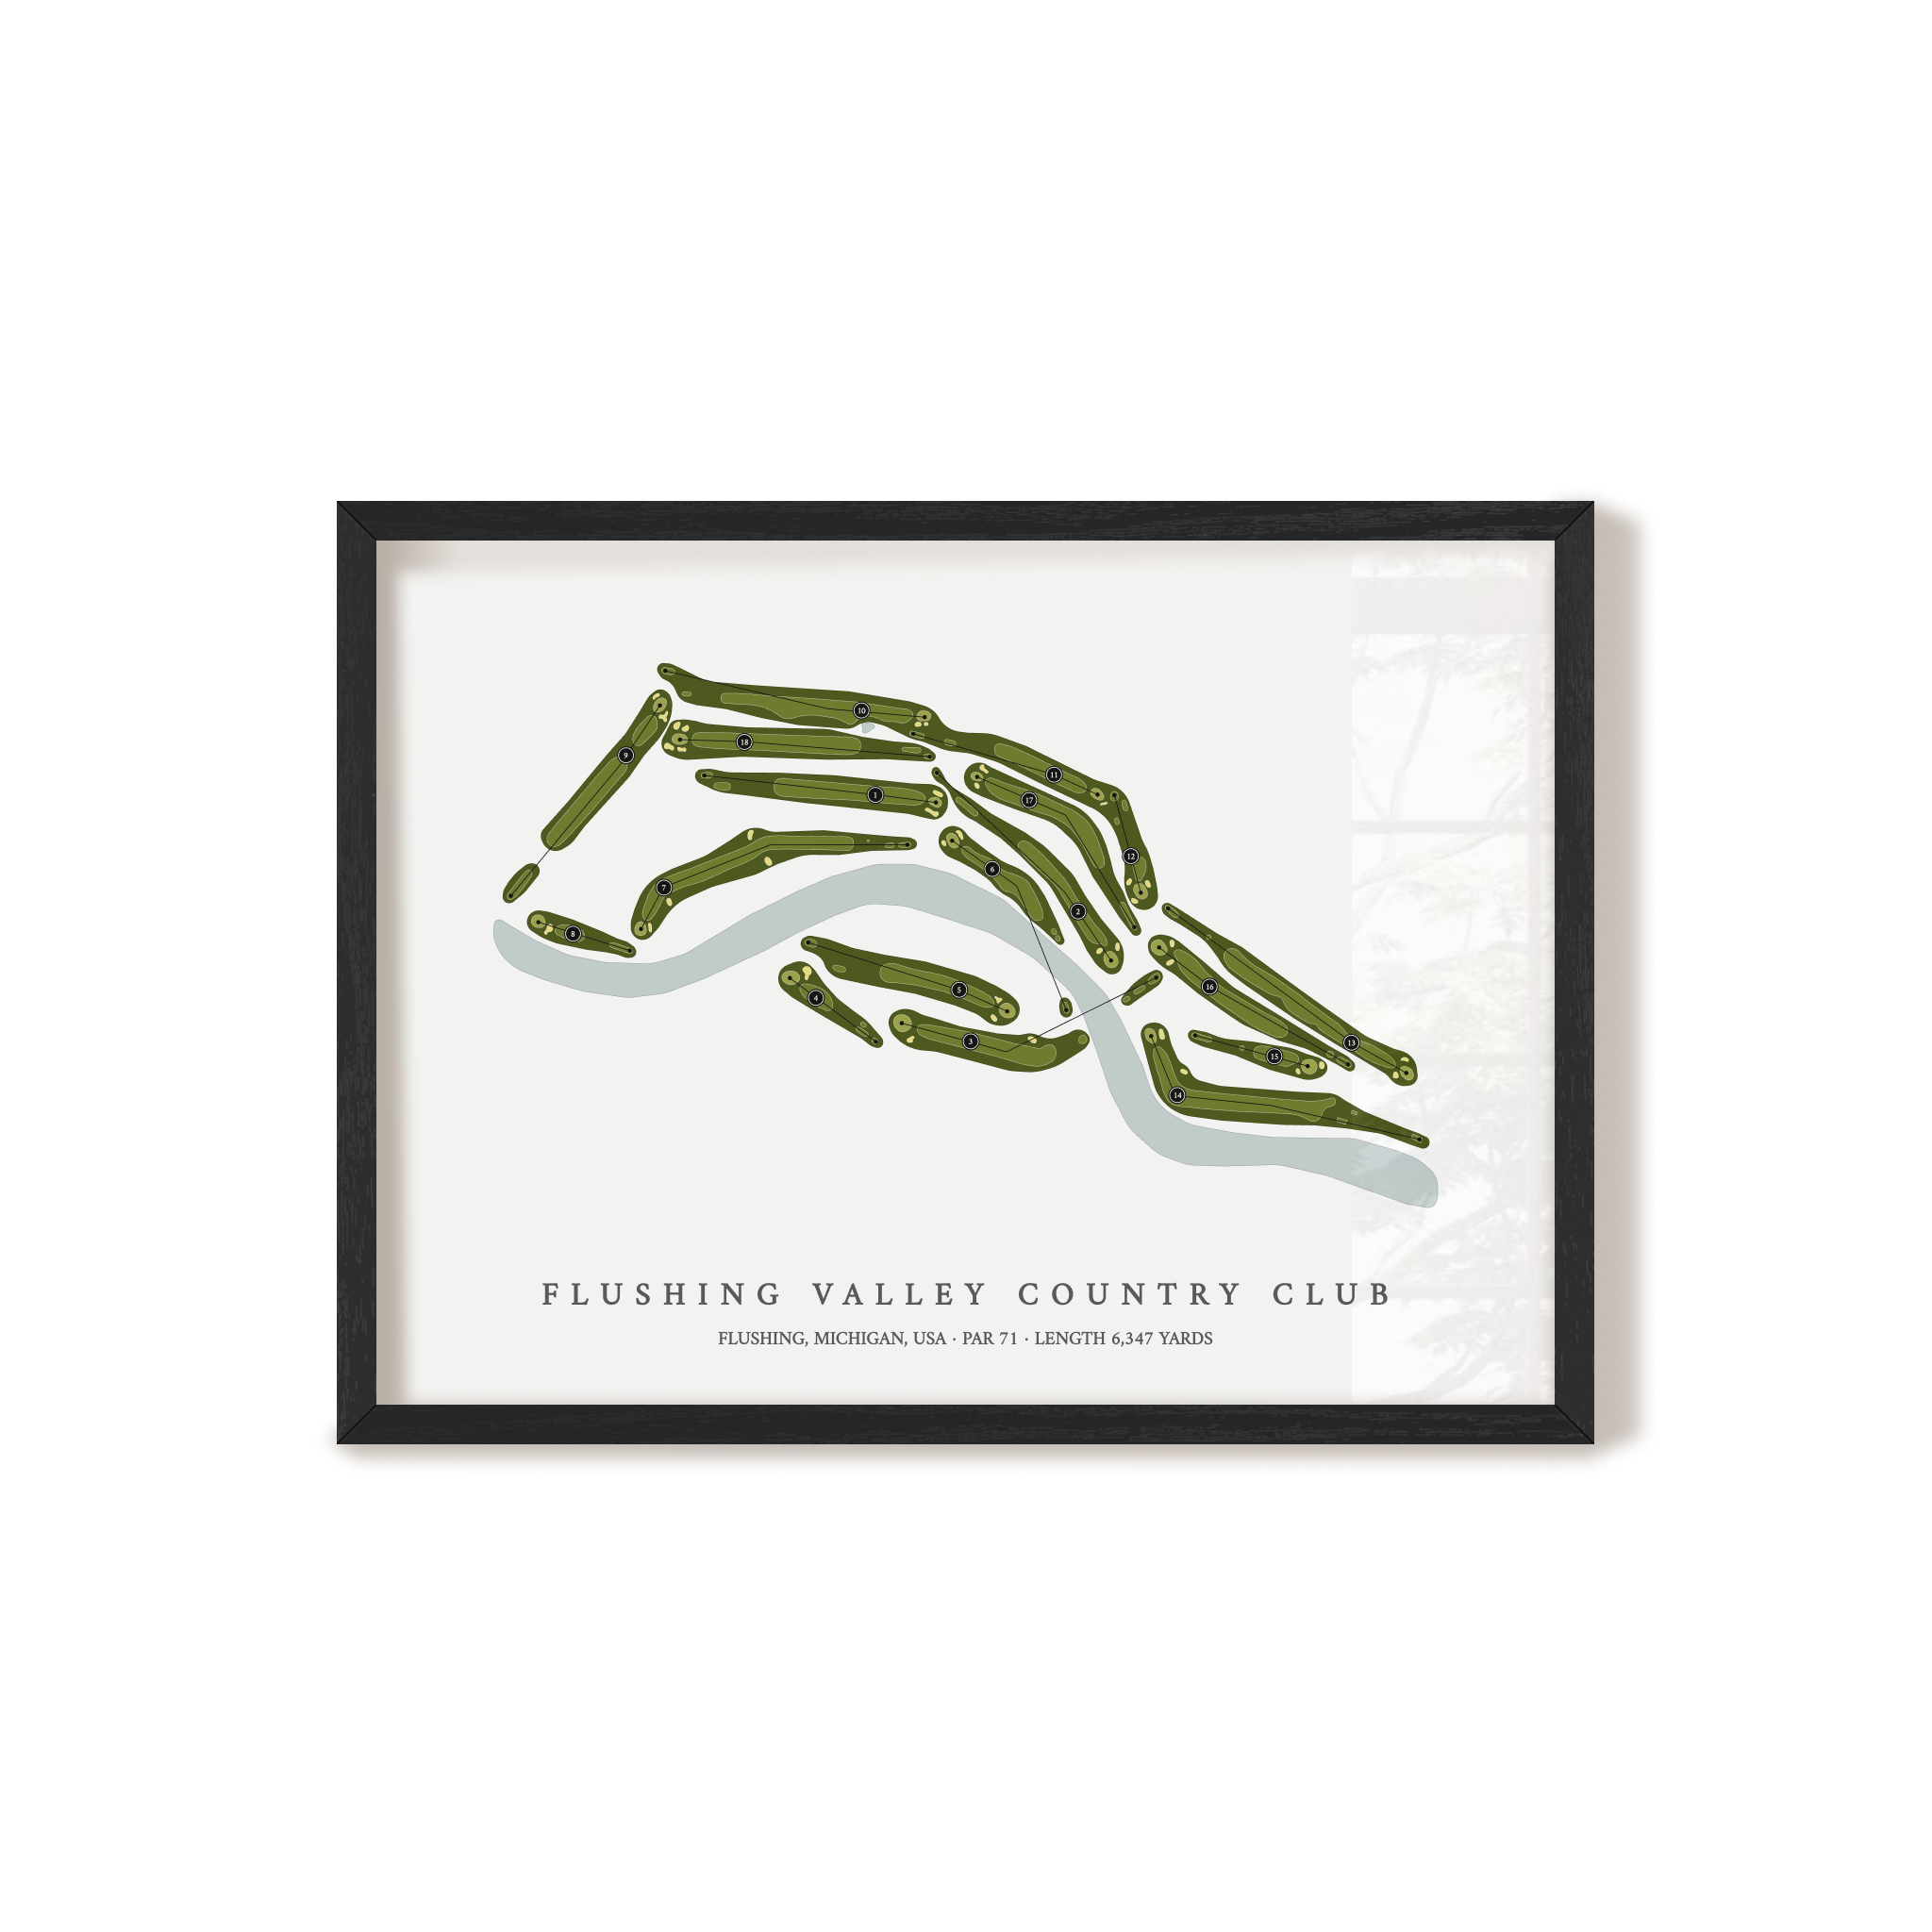 Flushing Valley Country Club | Golf Course Map | Black Frame 